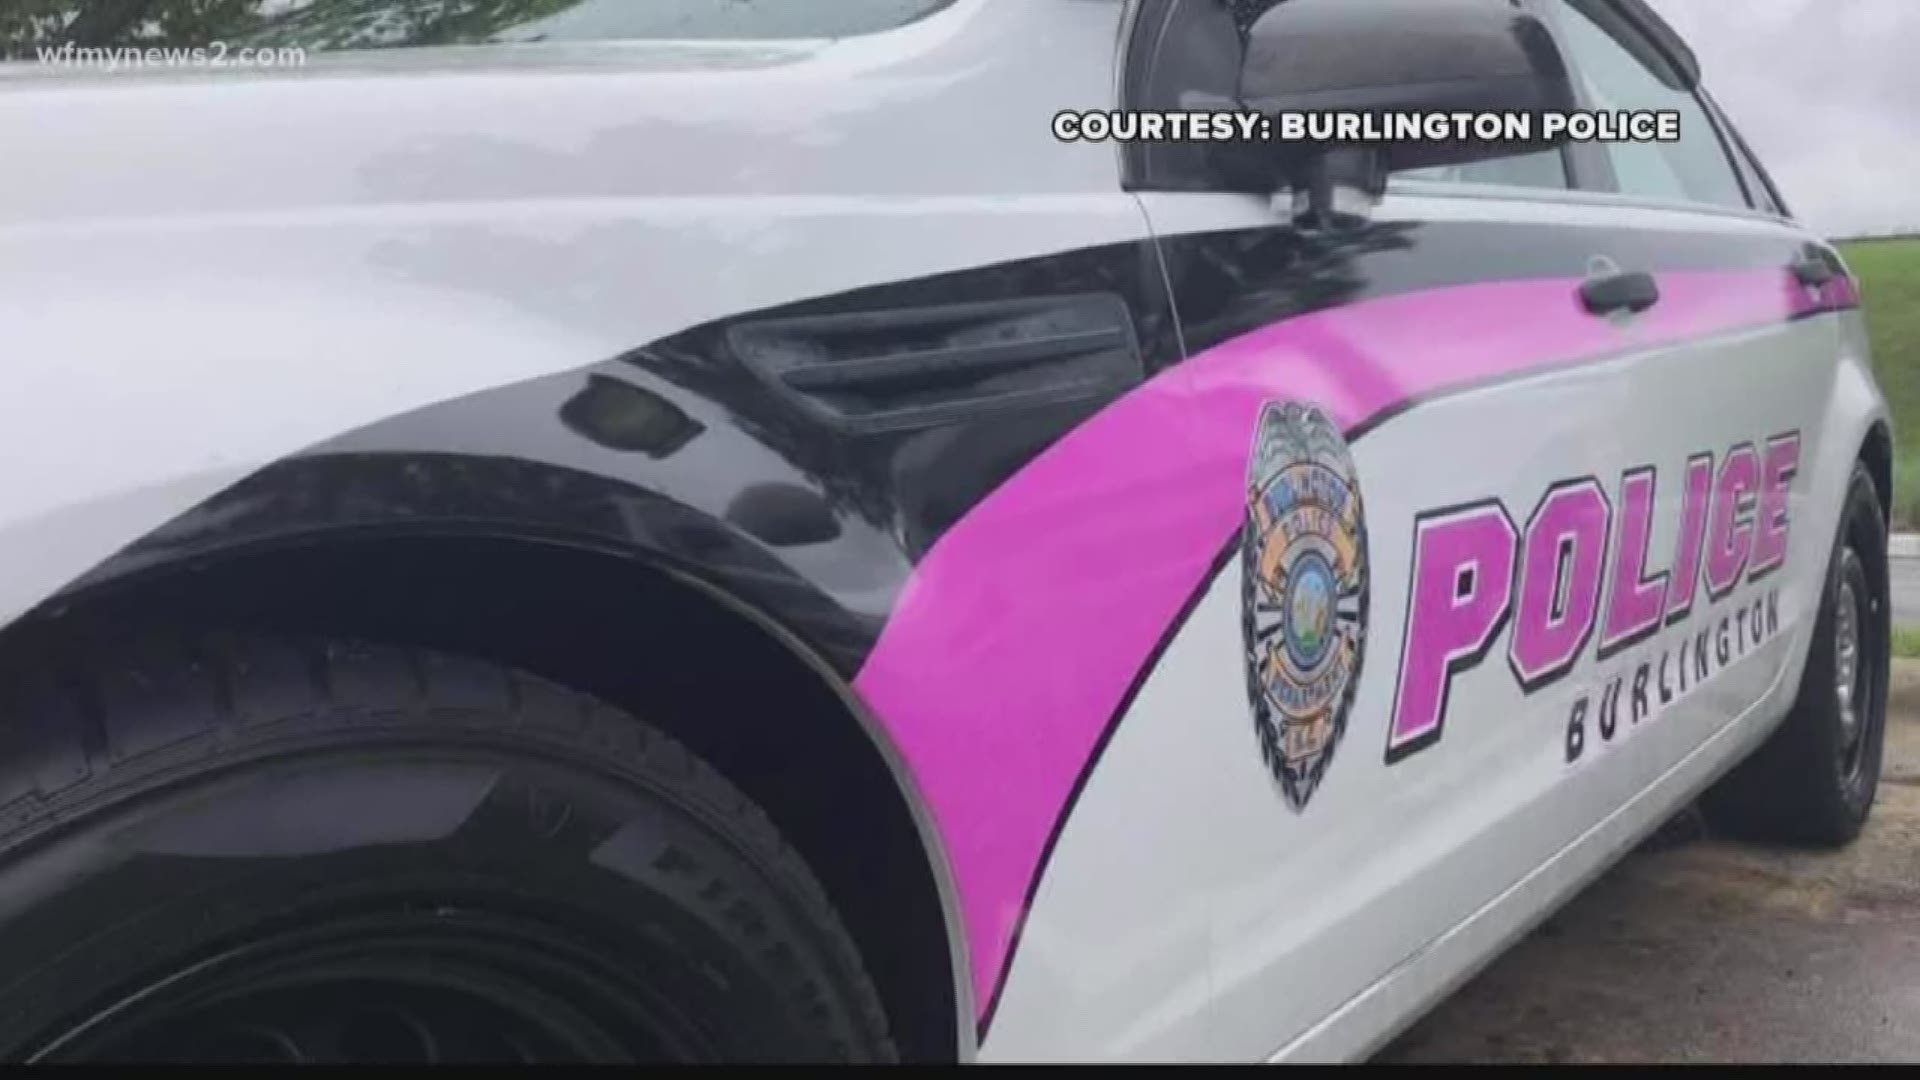 More than 80 officers with Burlington Police will wear pink badges all month long to recognize Breast Cancer Awareness Month